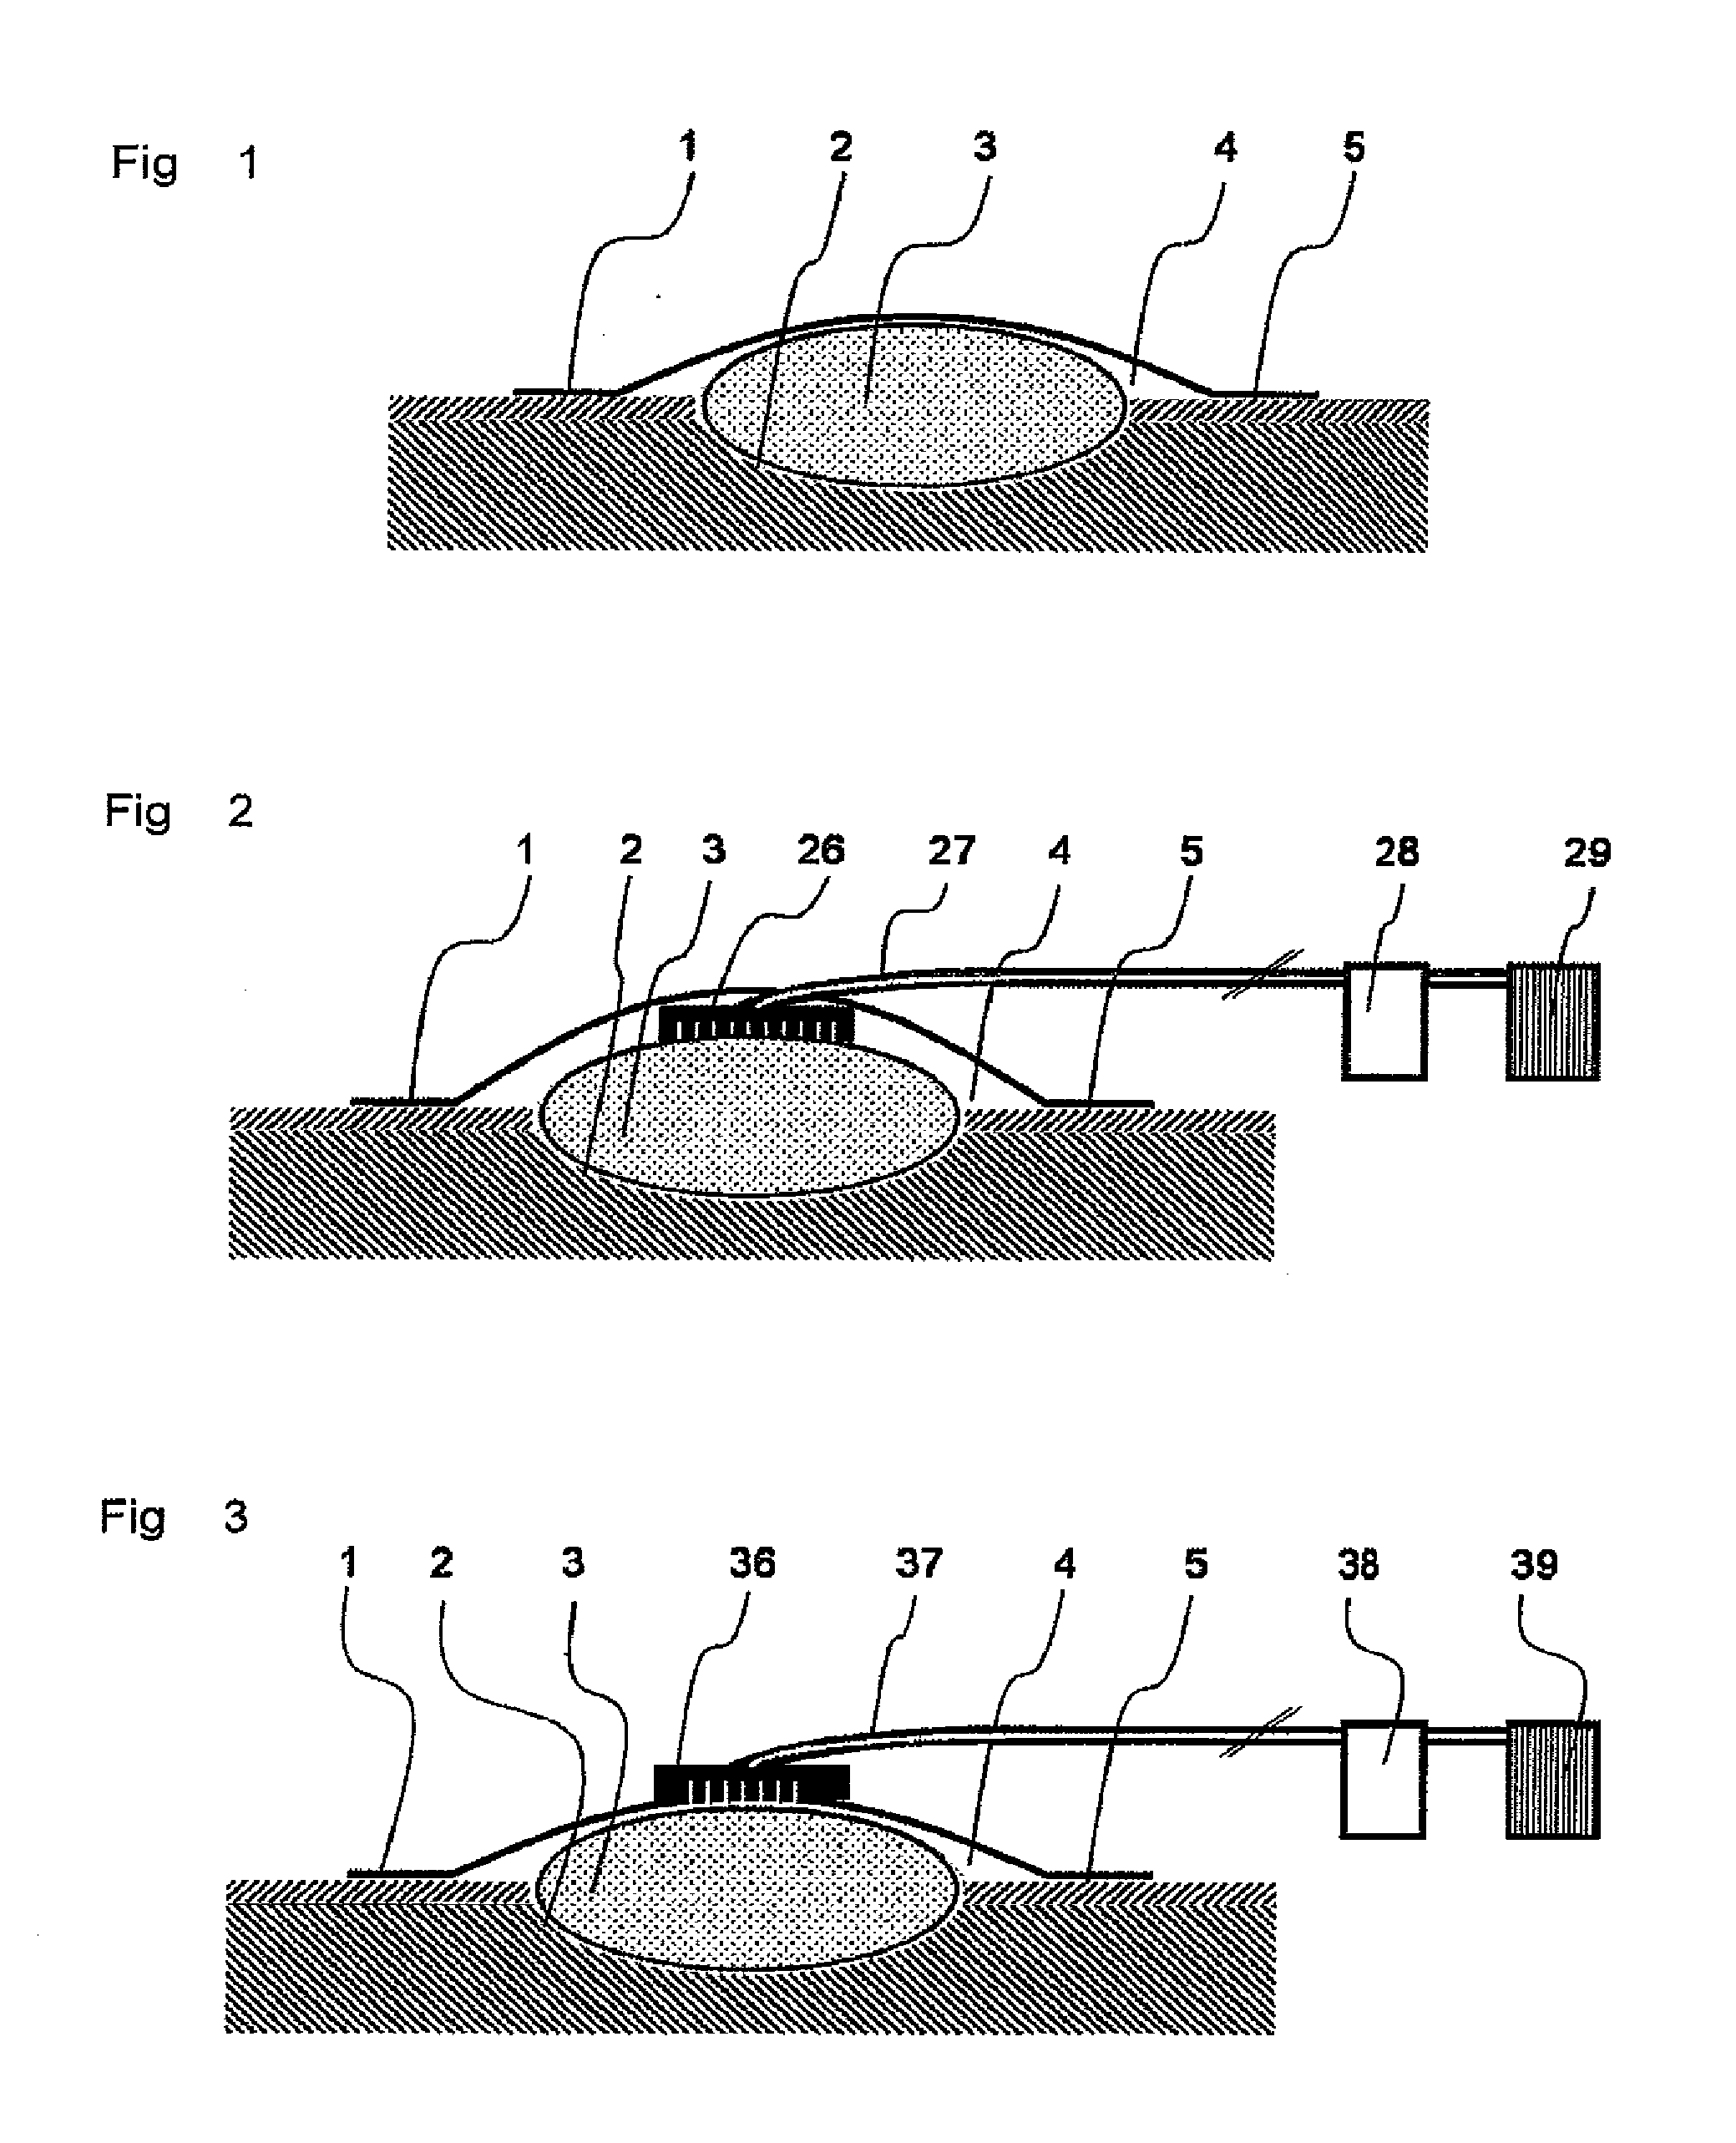 Method for vacuum therapy of wounds